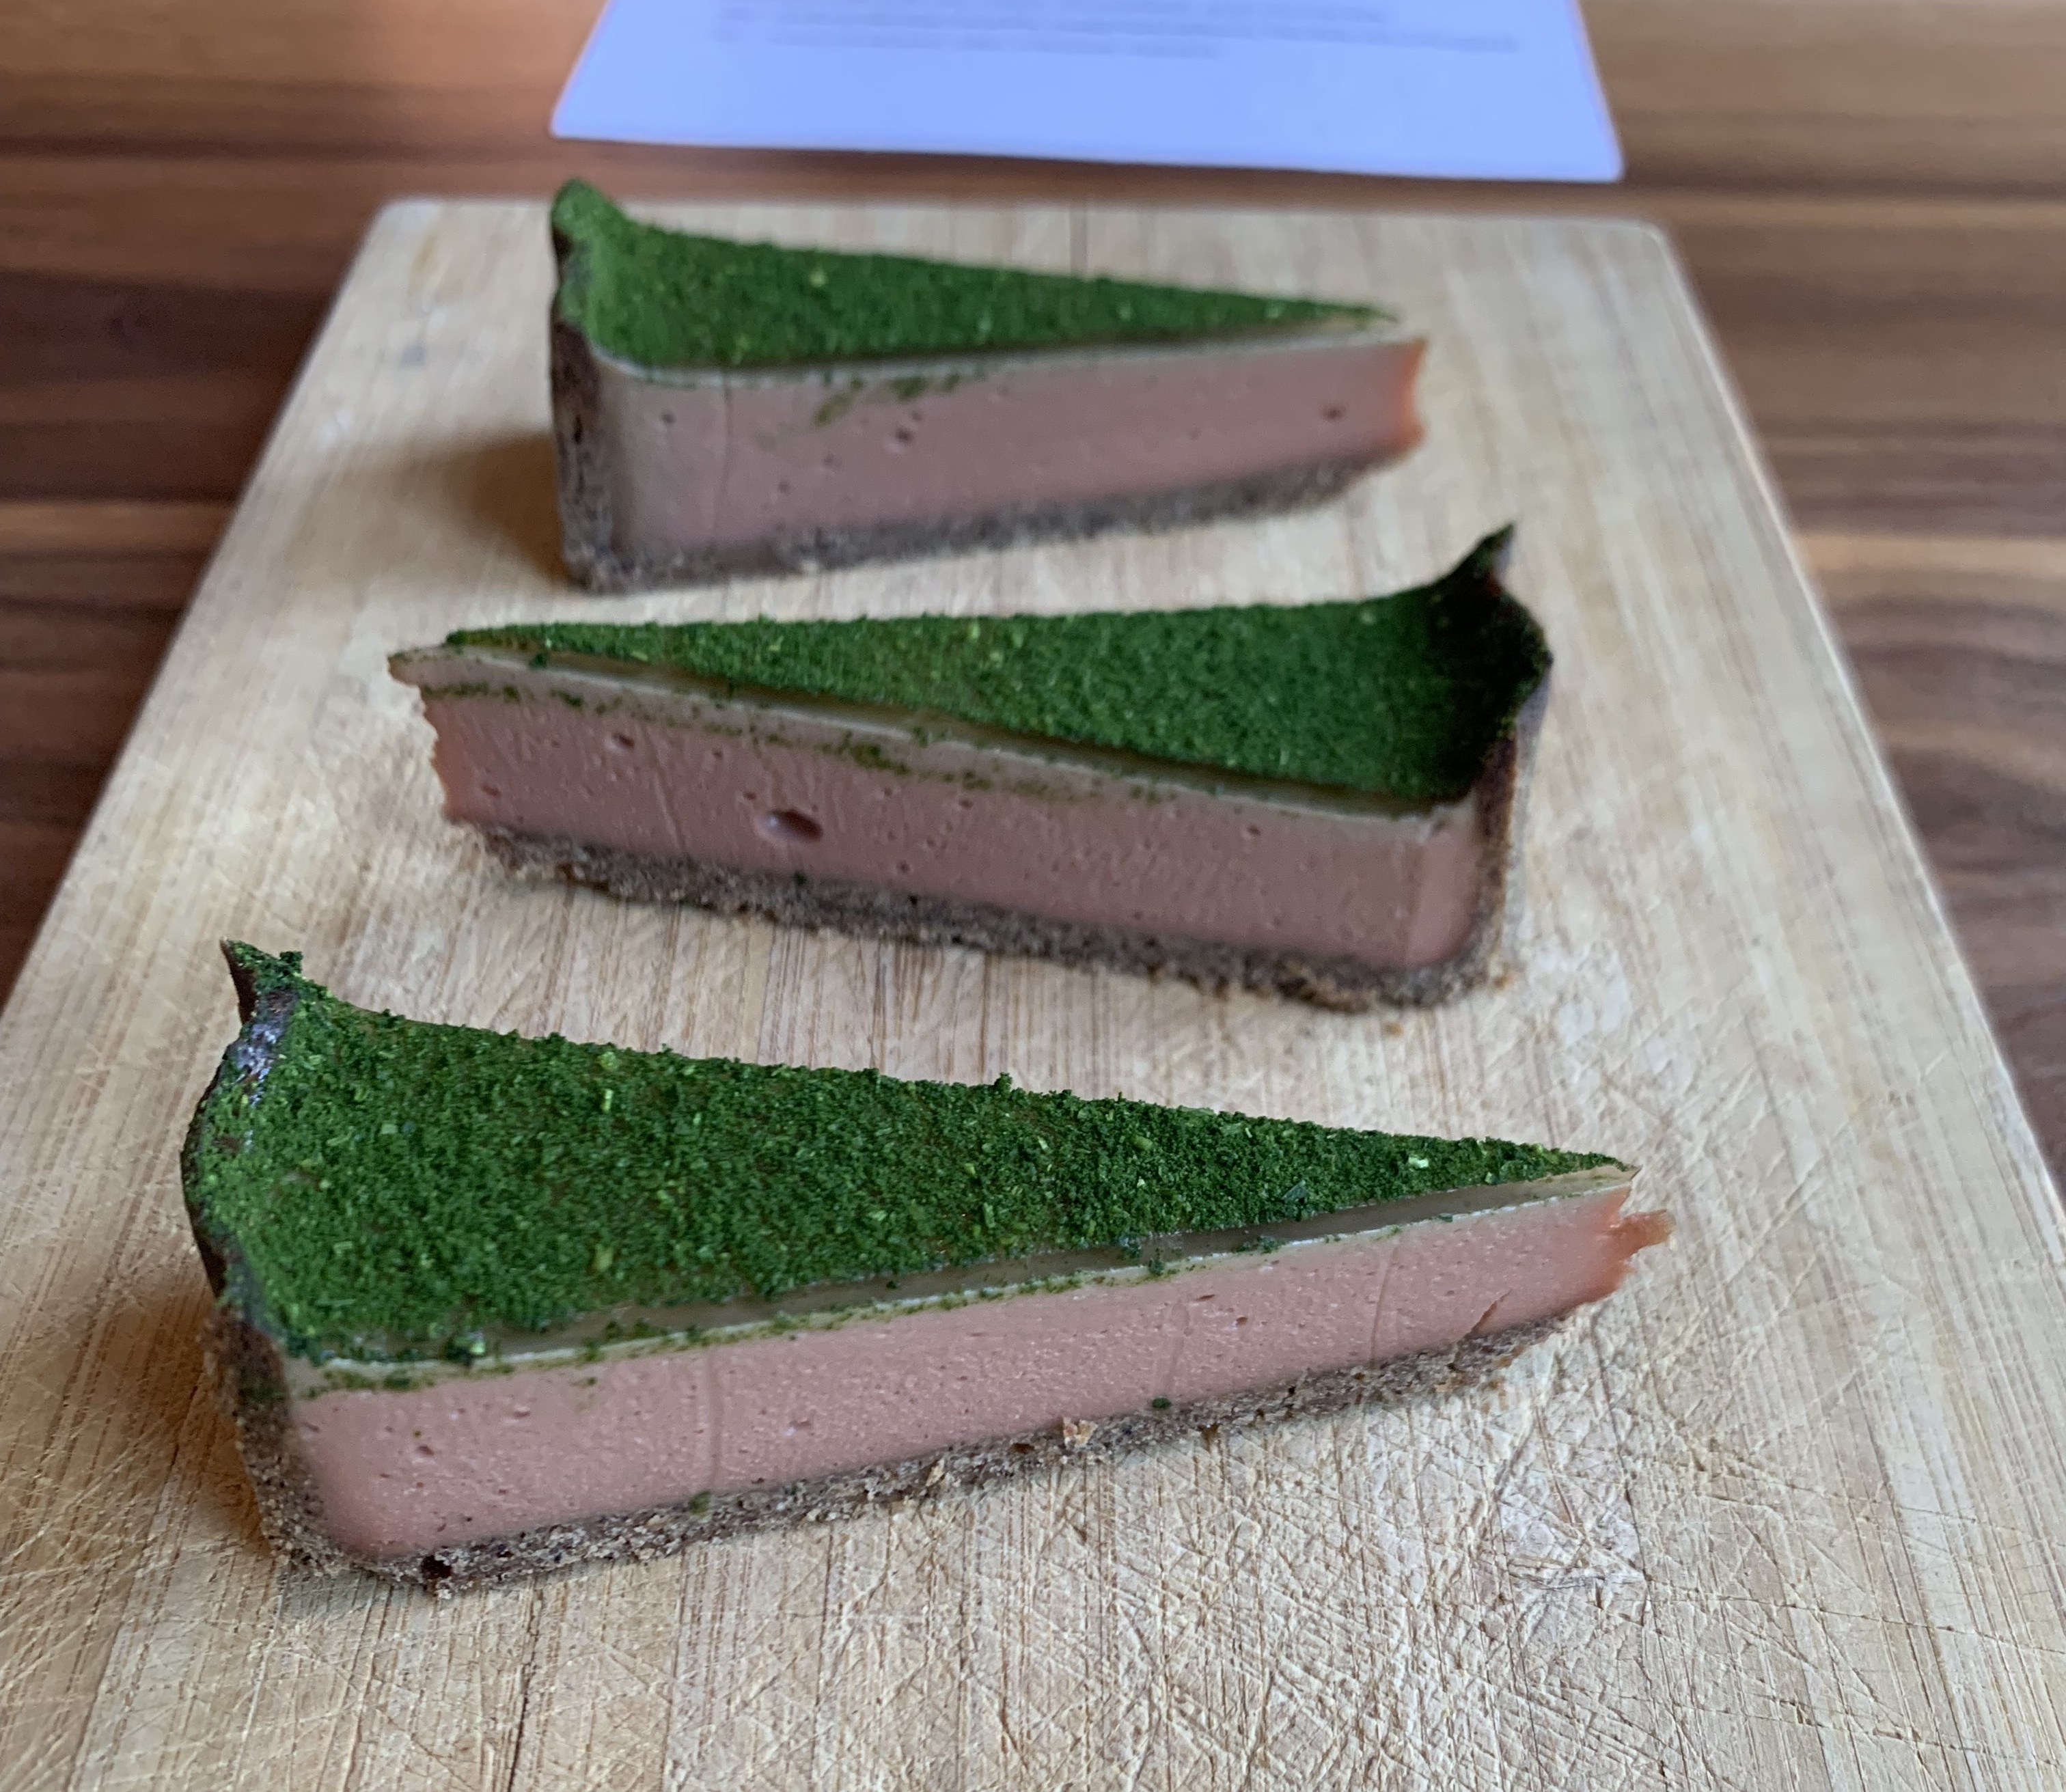 Three slices of tart served on a board, arranged in a tessellated manner. The tart has a topping of fine green powder, and the filling is a fleshy pink colour.